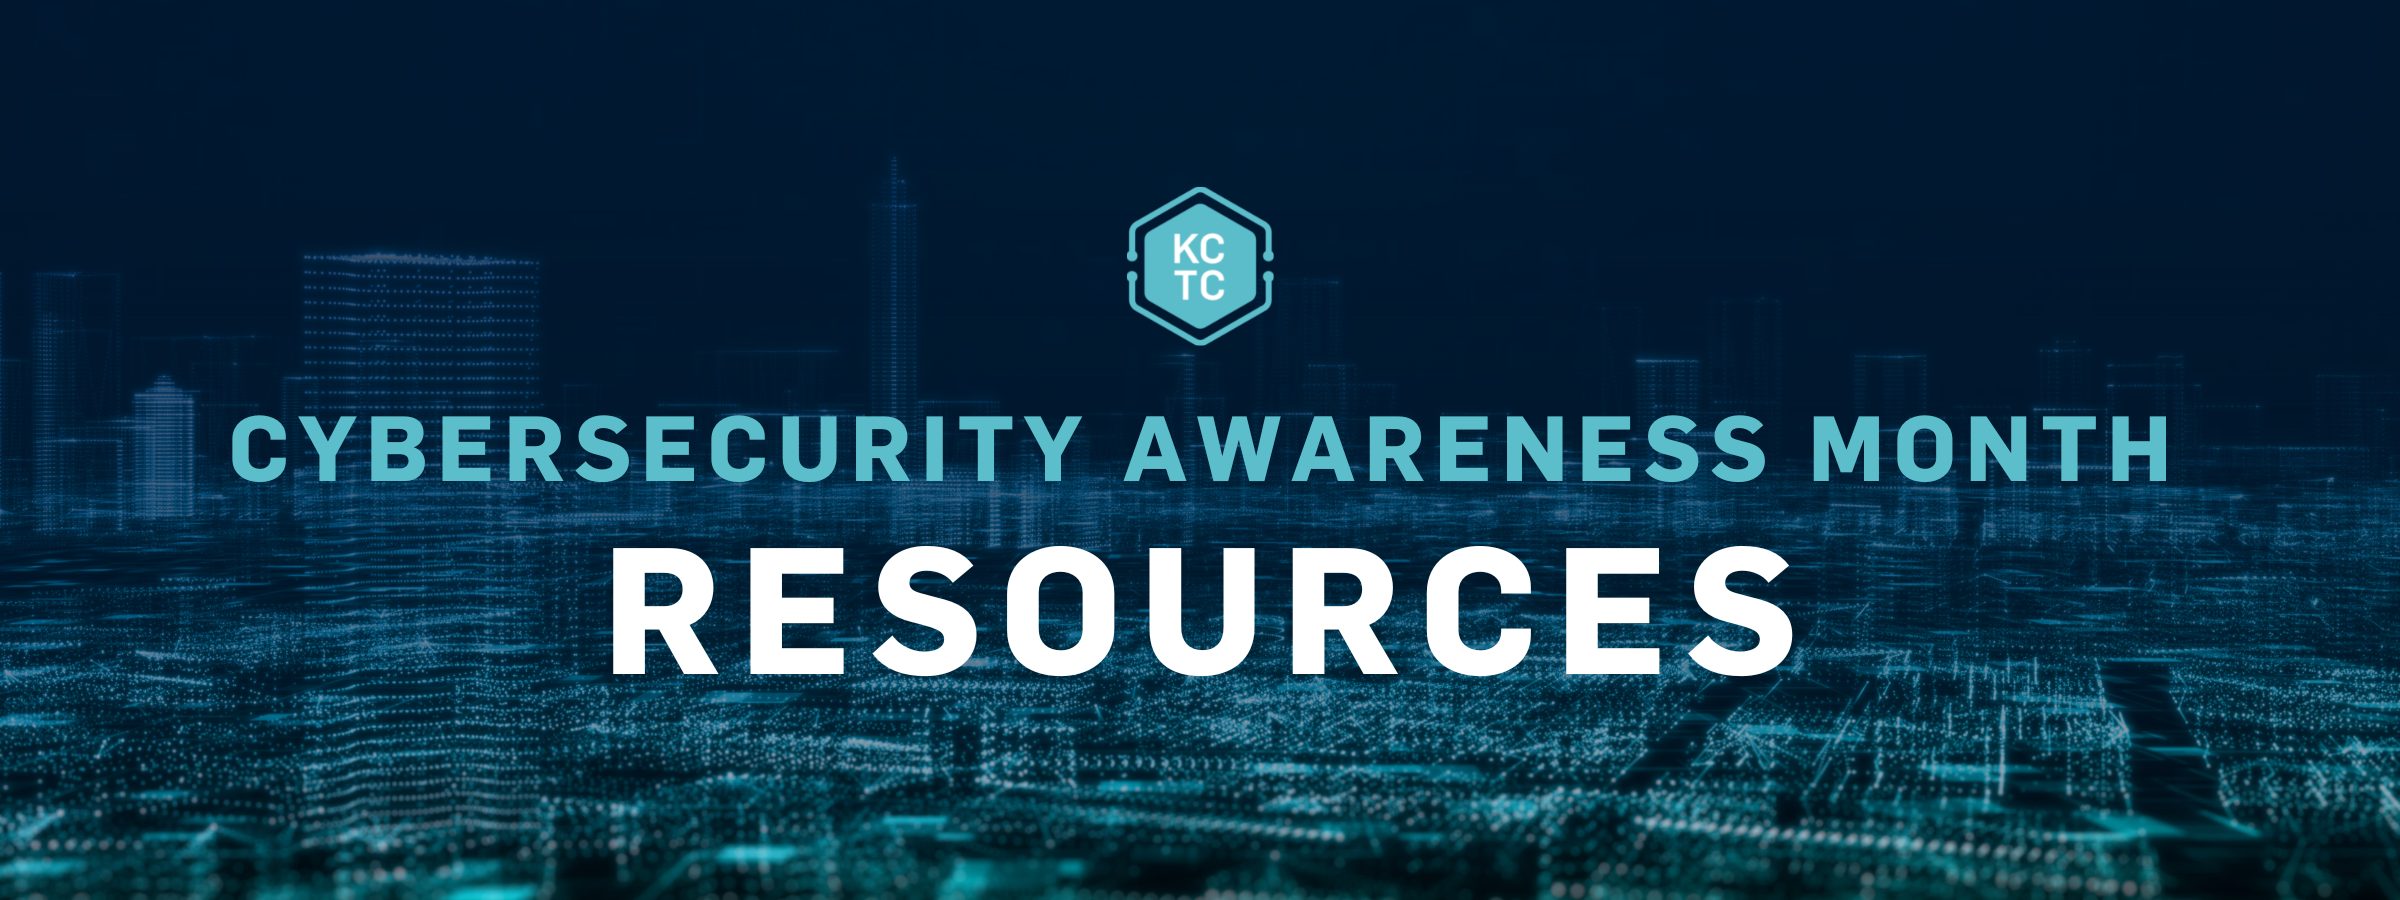 2022 Cybersecurity Awareness Month Resources (1)